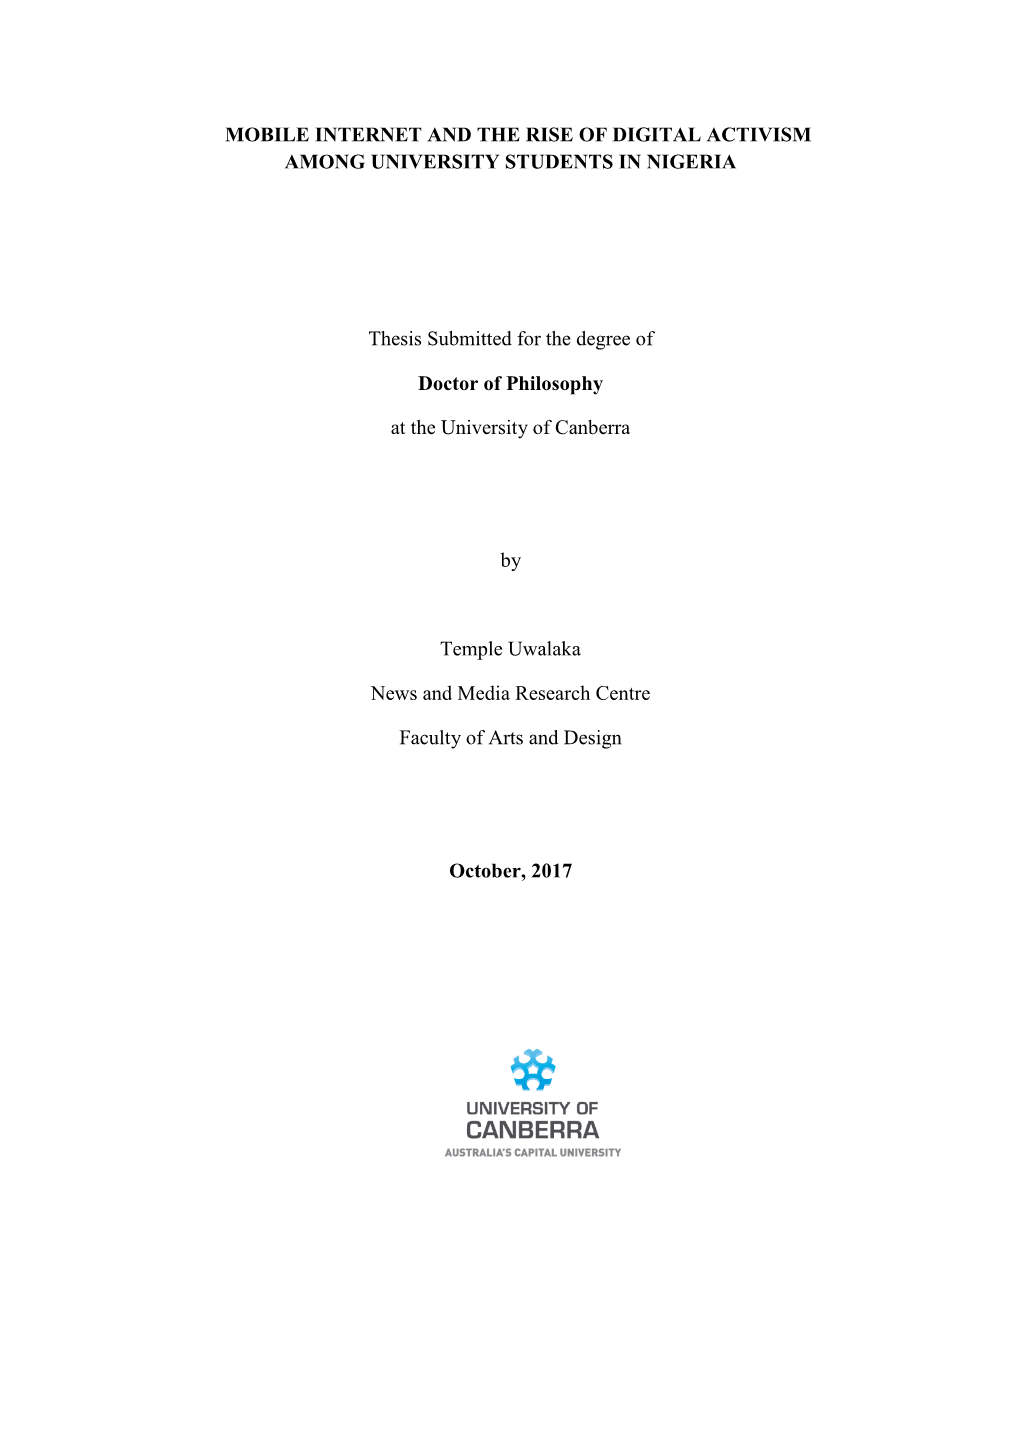 MOBILE INTERNET and the RISE of DIGITAL ACTIVISM AMONG UNIVERSITY STUDENTS in NIGERIA Thesis Submitted for the Degree of Doct